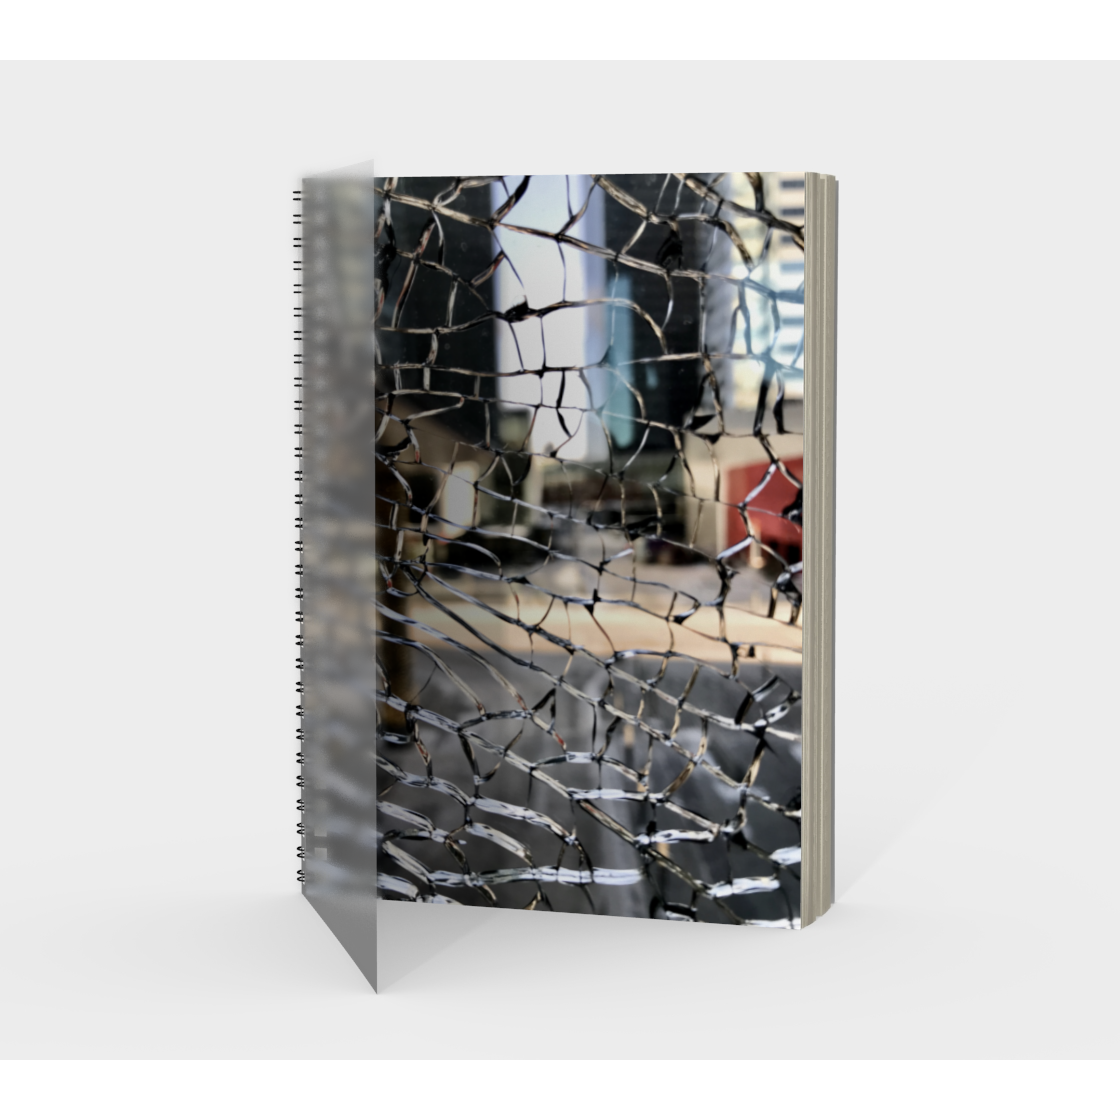 Notebook, Spiral-Bound, Custom Designed with our Broken Glass Picture, Front